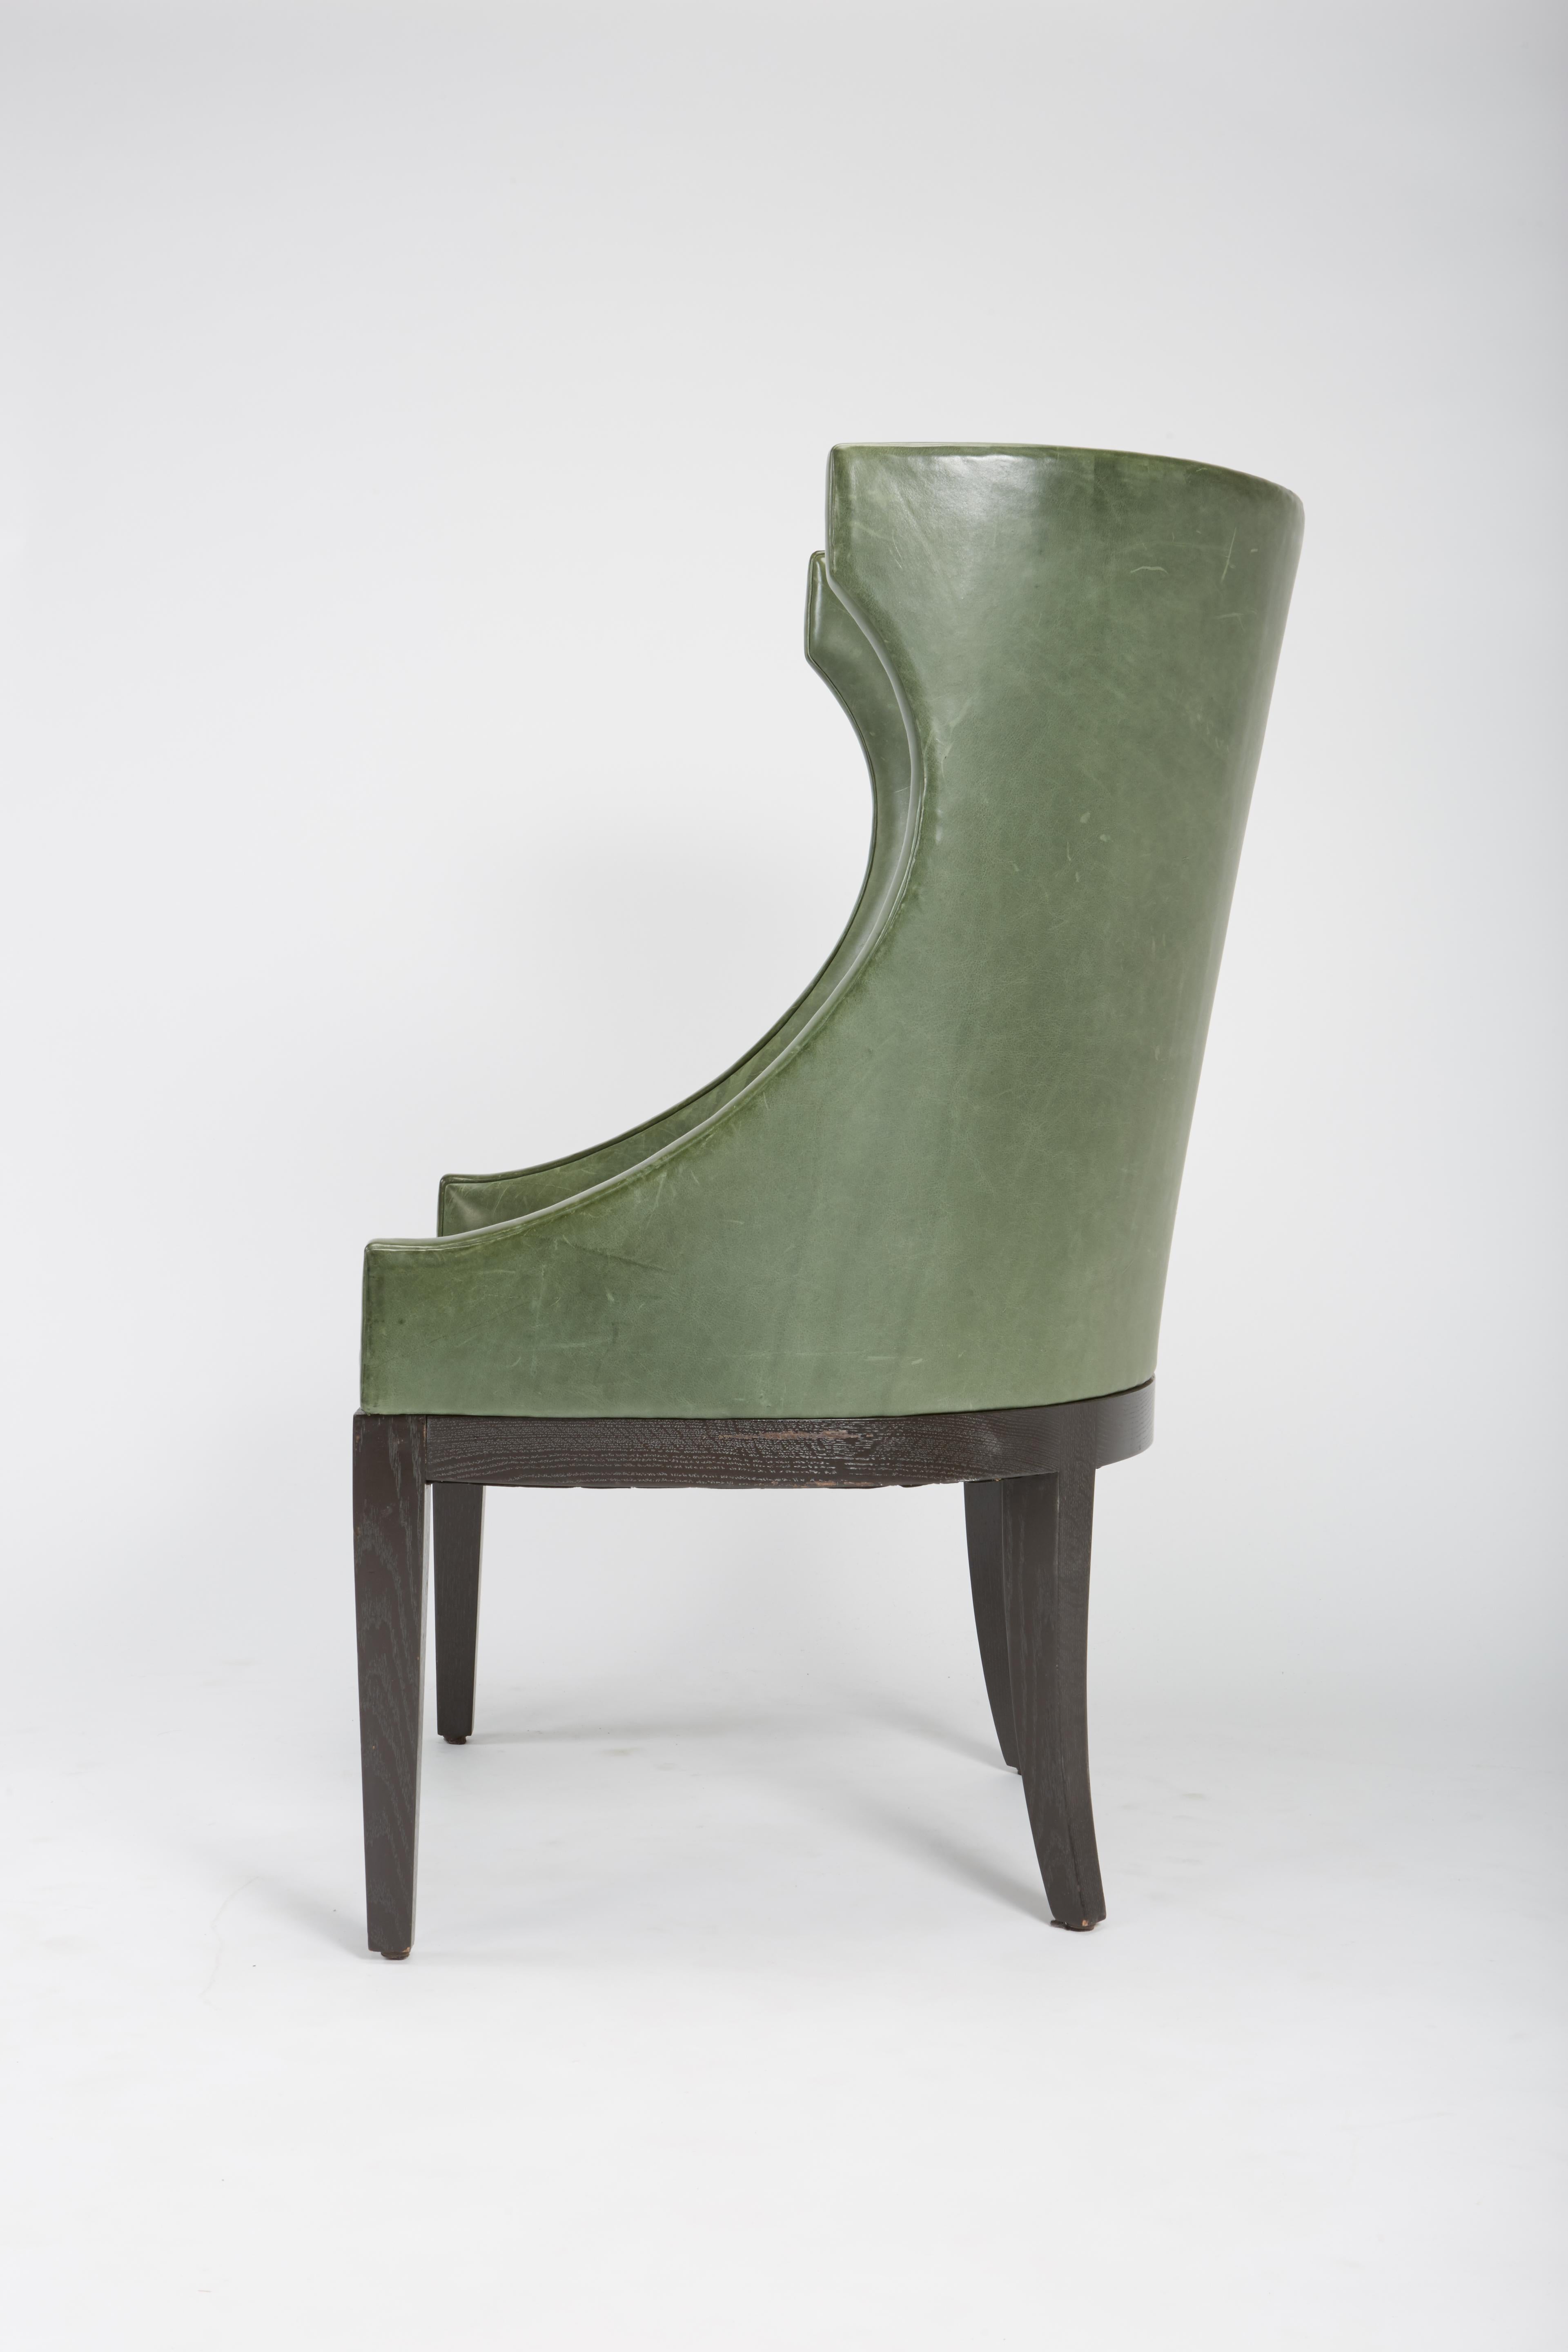 Contemporary Dessin Fournir Classical Modern High Wingback with Green Leather Armchairs